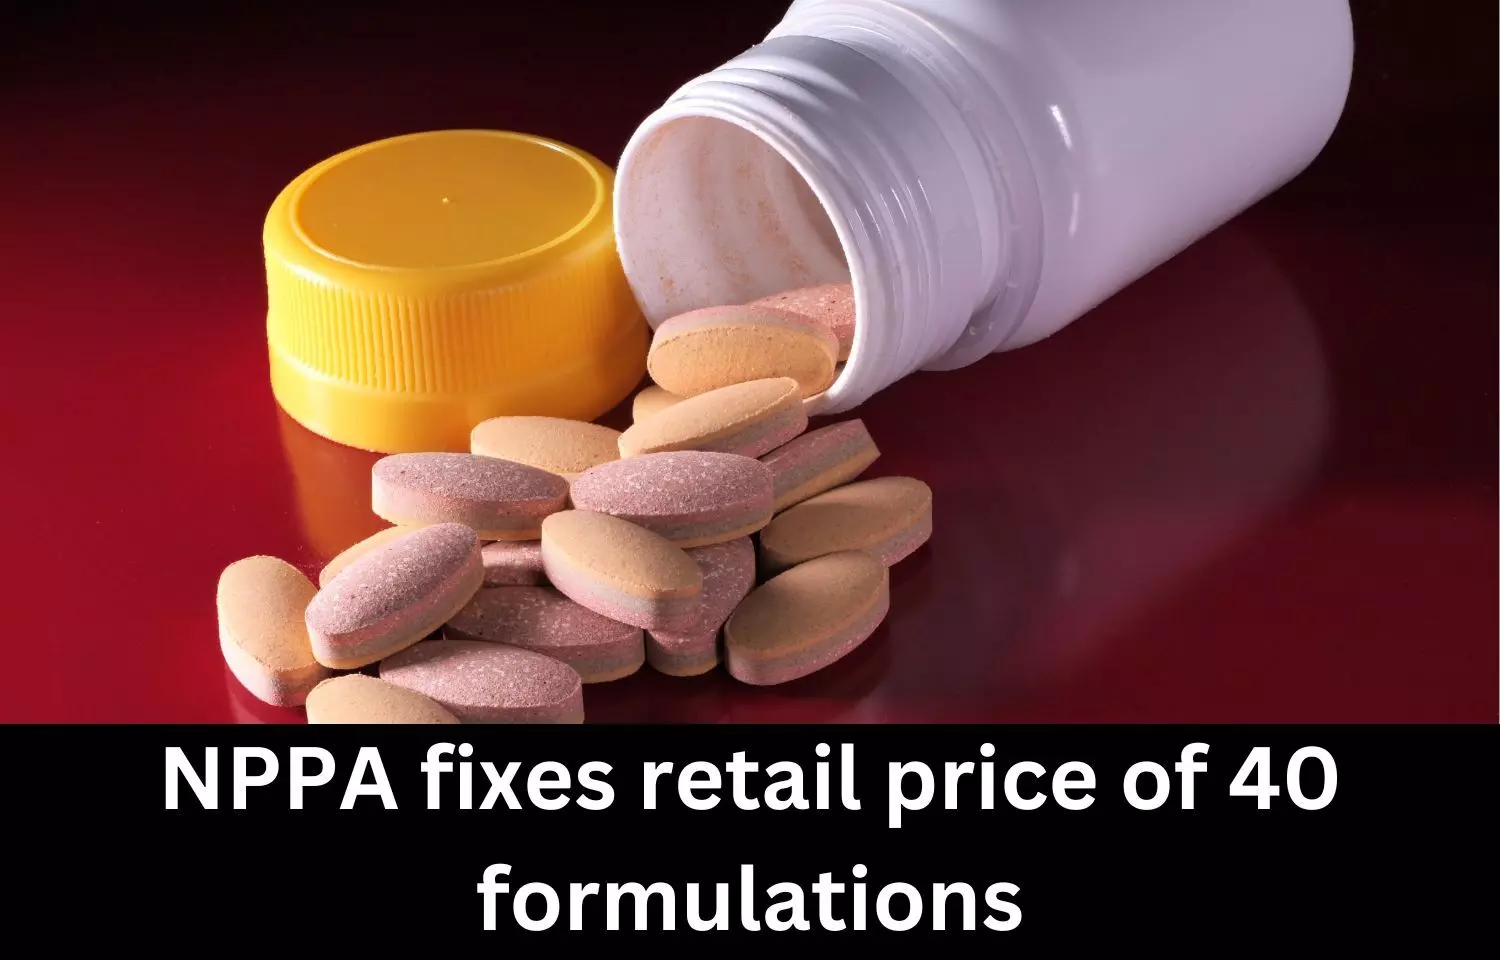 NPPA fixes retail price of 40 formulations